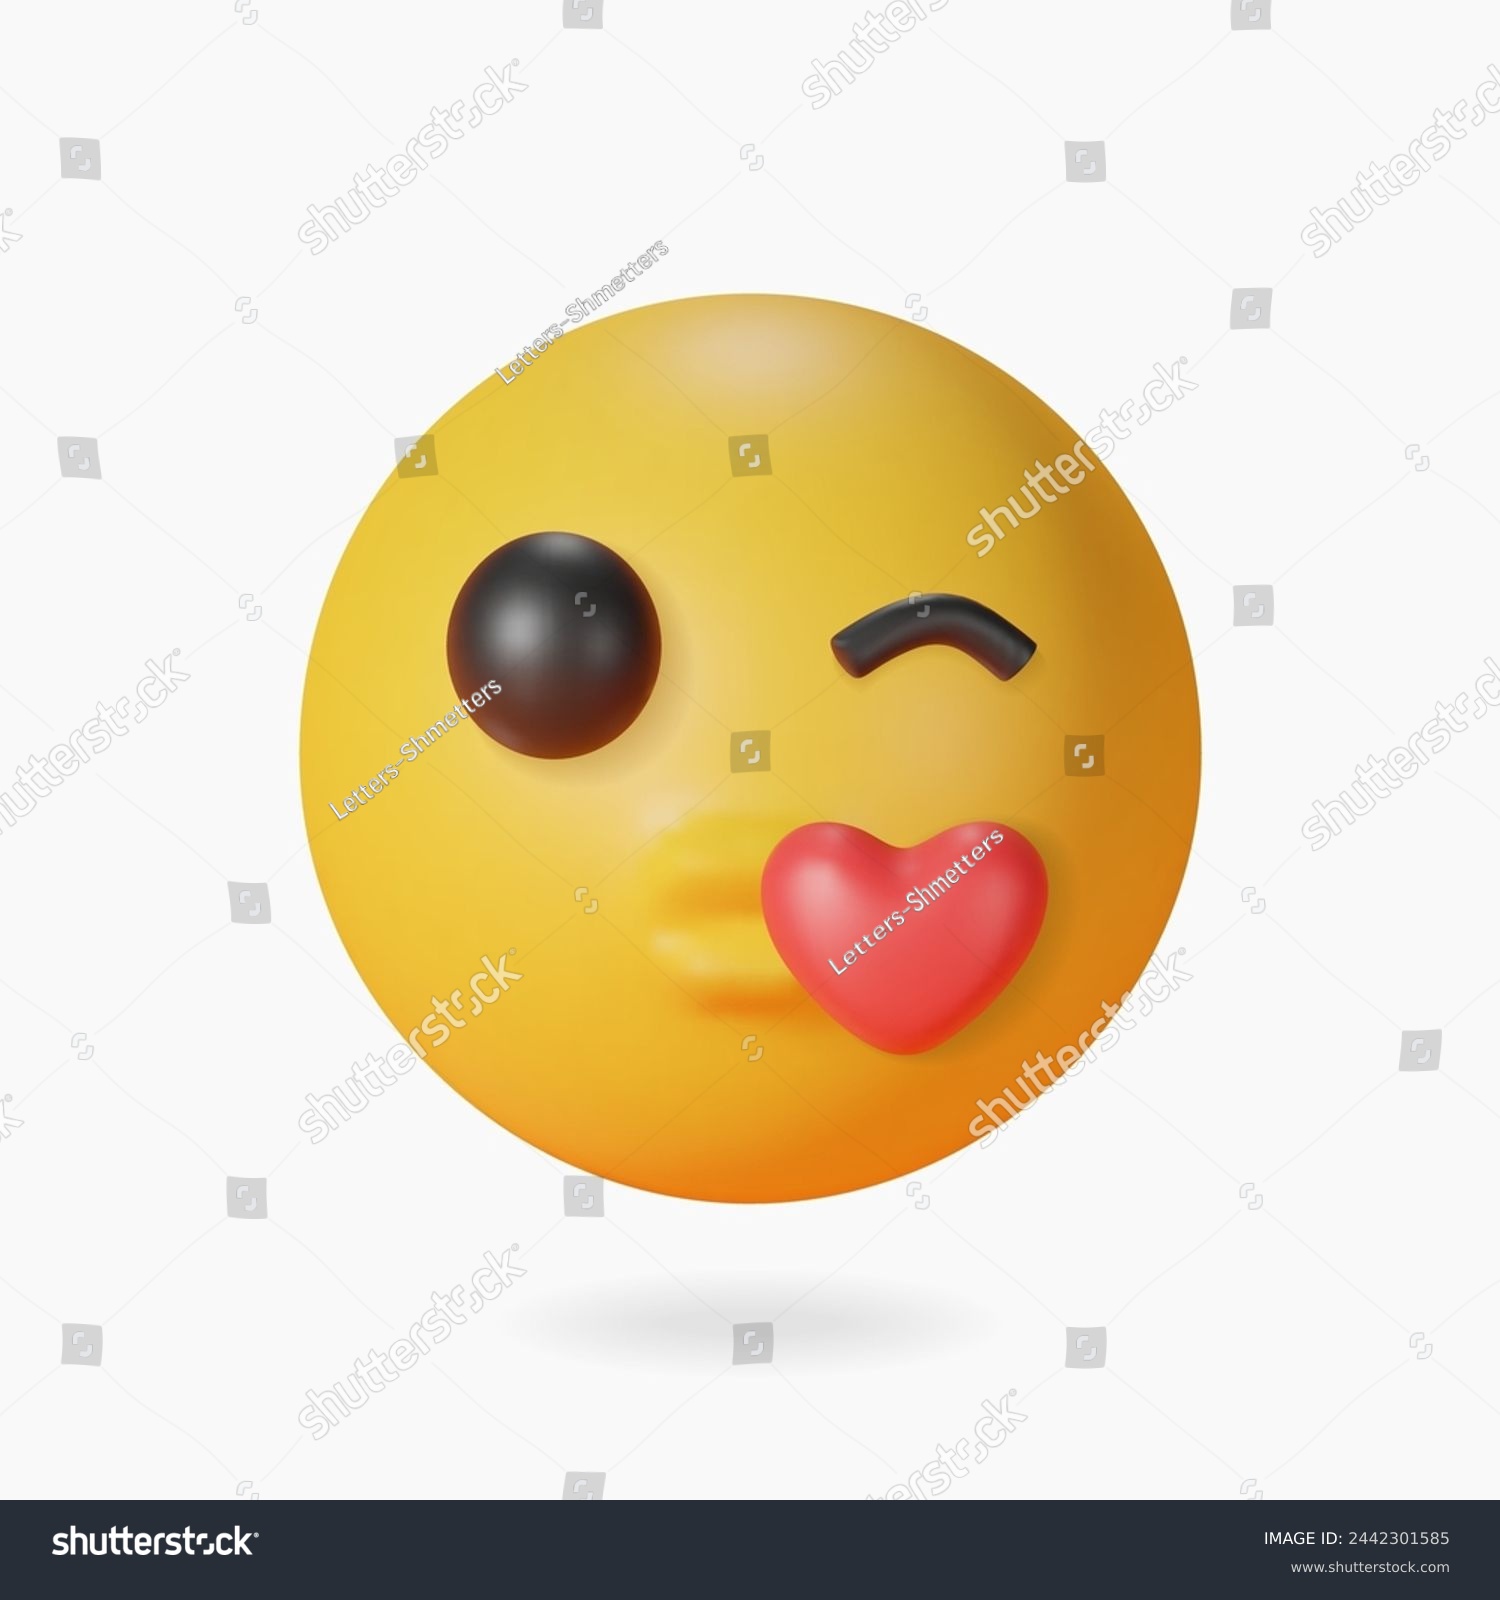 SVG of 3d kiss emoji. Love emoticon with lips blowing a kiss, winking yellow face with red heart. 3d render glossy plastic icon. Vector illustration. svg